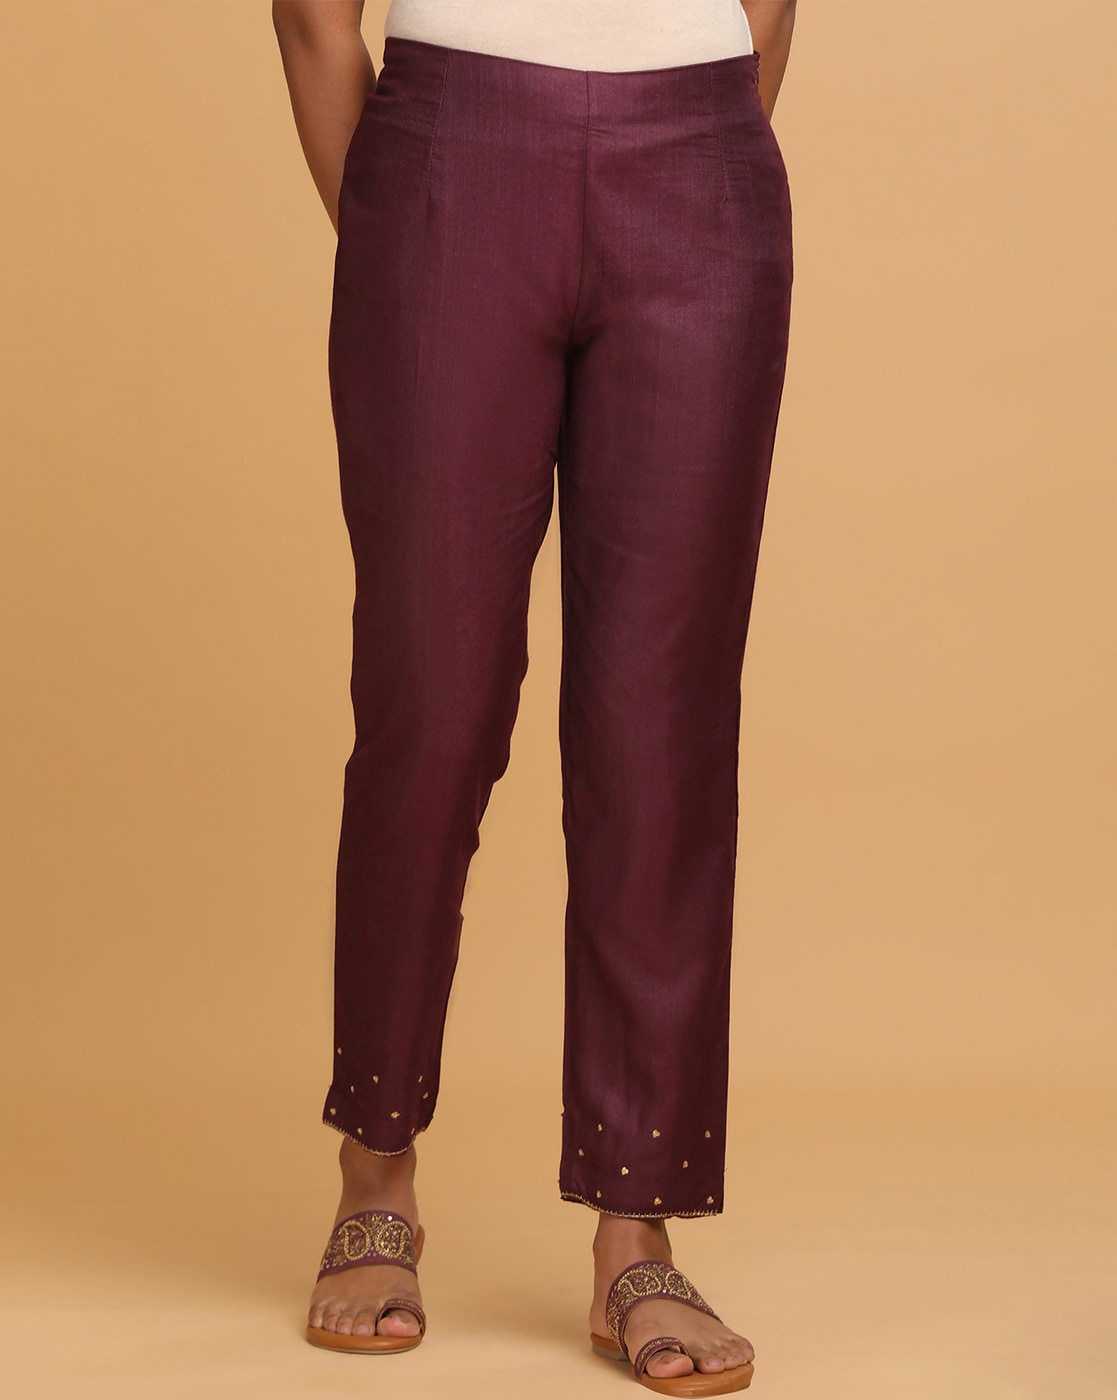 Palazzos  Pants  Buy Palazzos  Pants Online in India  Shop for W